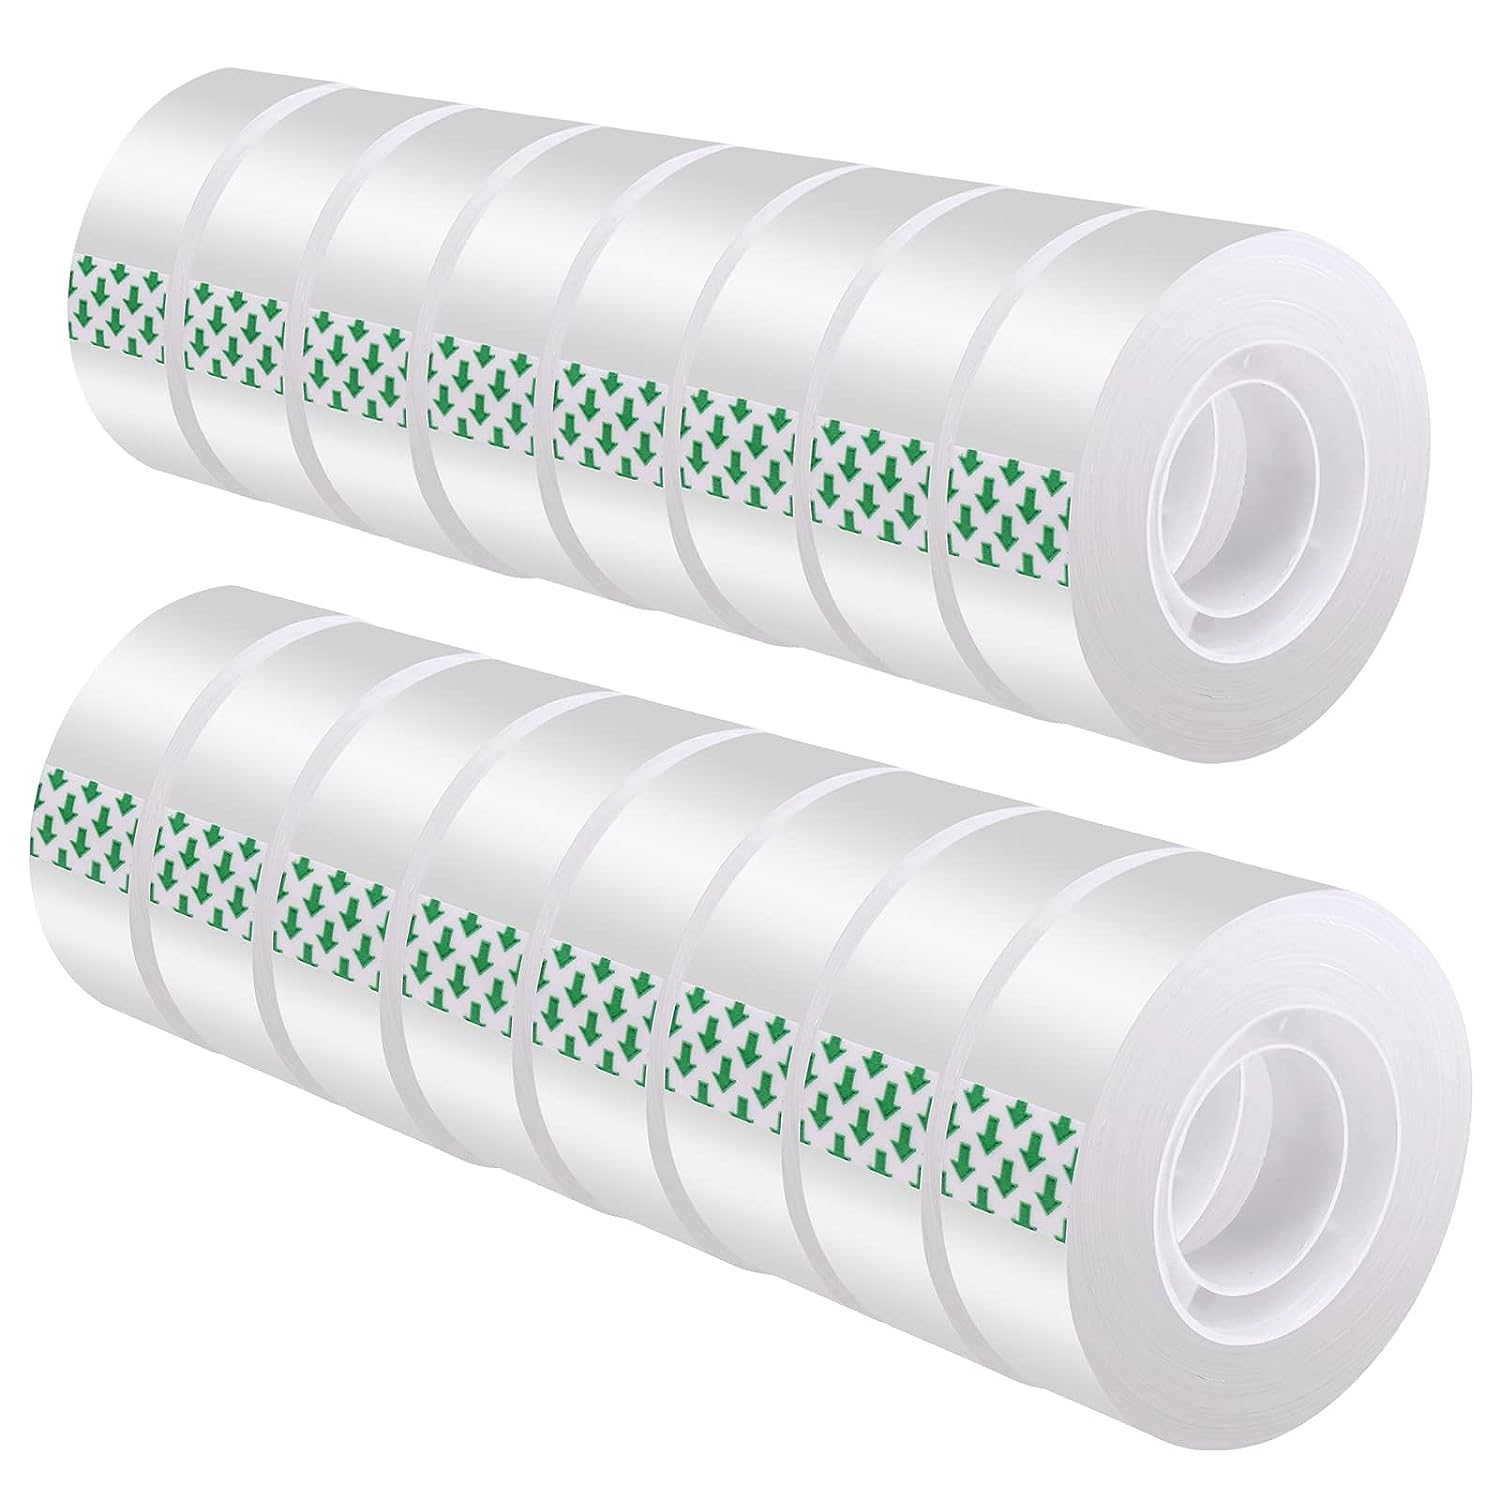 DHOOZ 16 Rolls Clear Tape for Gift Wrapping, [...]